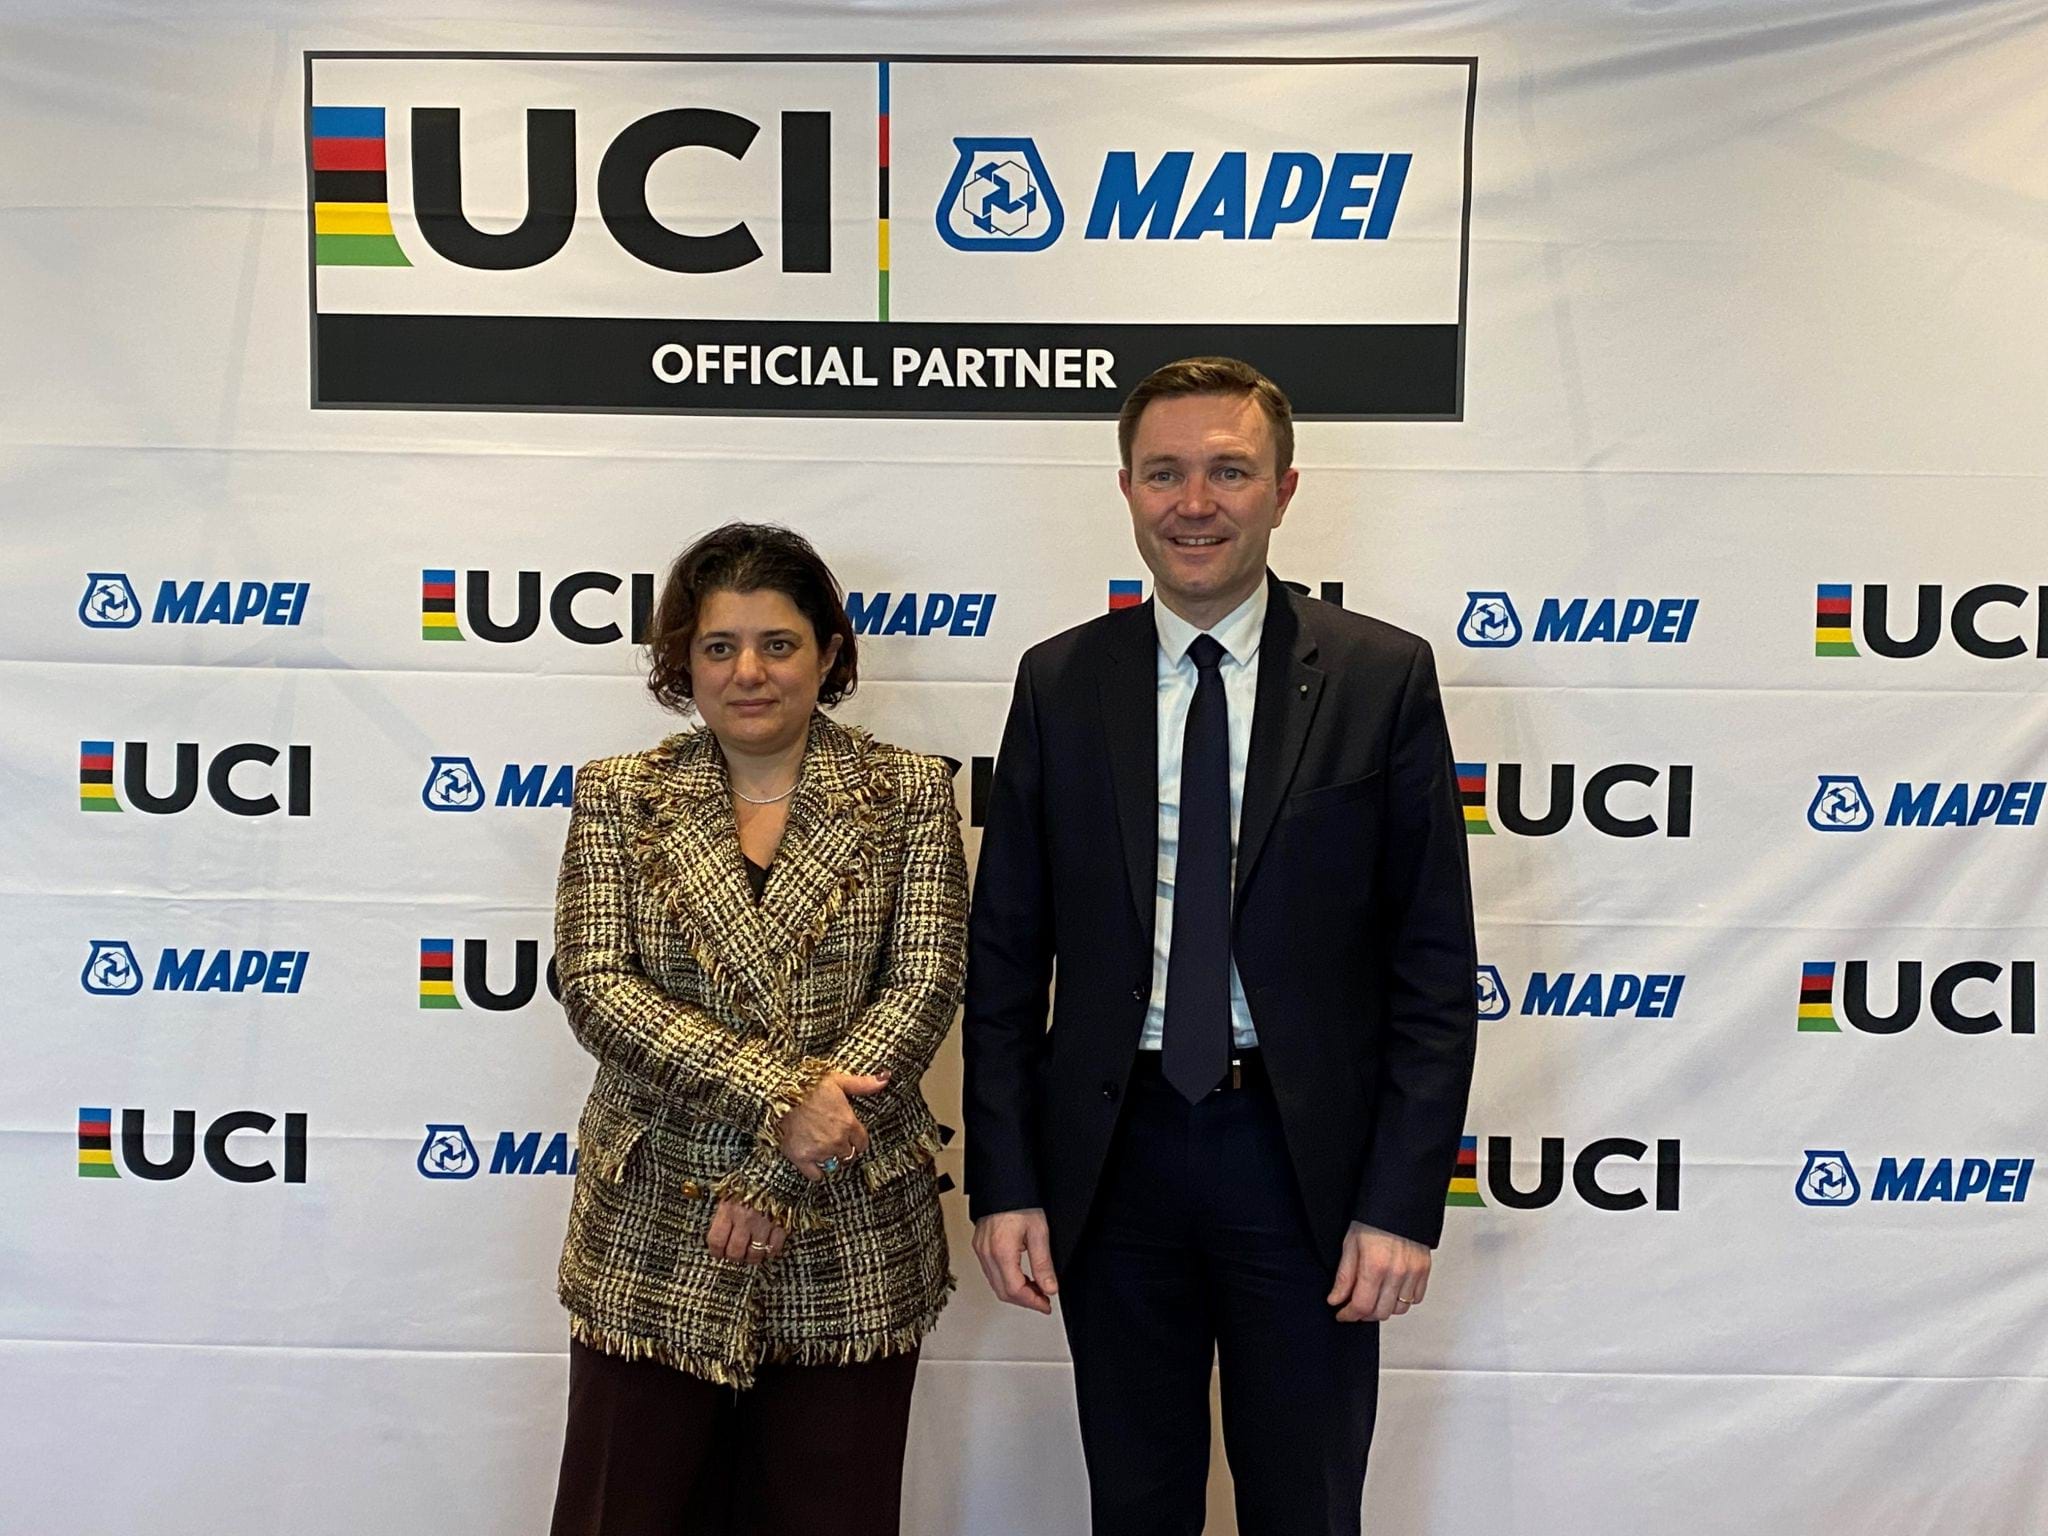 MAPEI to be an official partner of the 2023 UCI Cycling World Championships in Glasgow and across Scotland